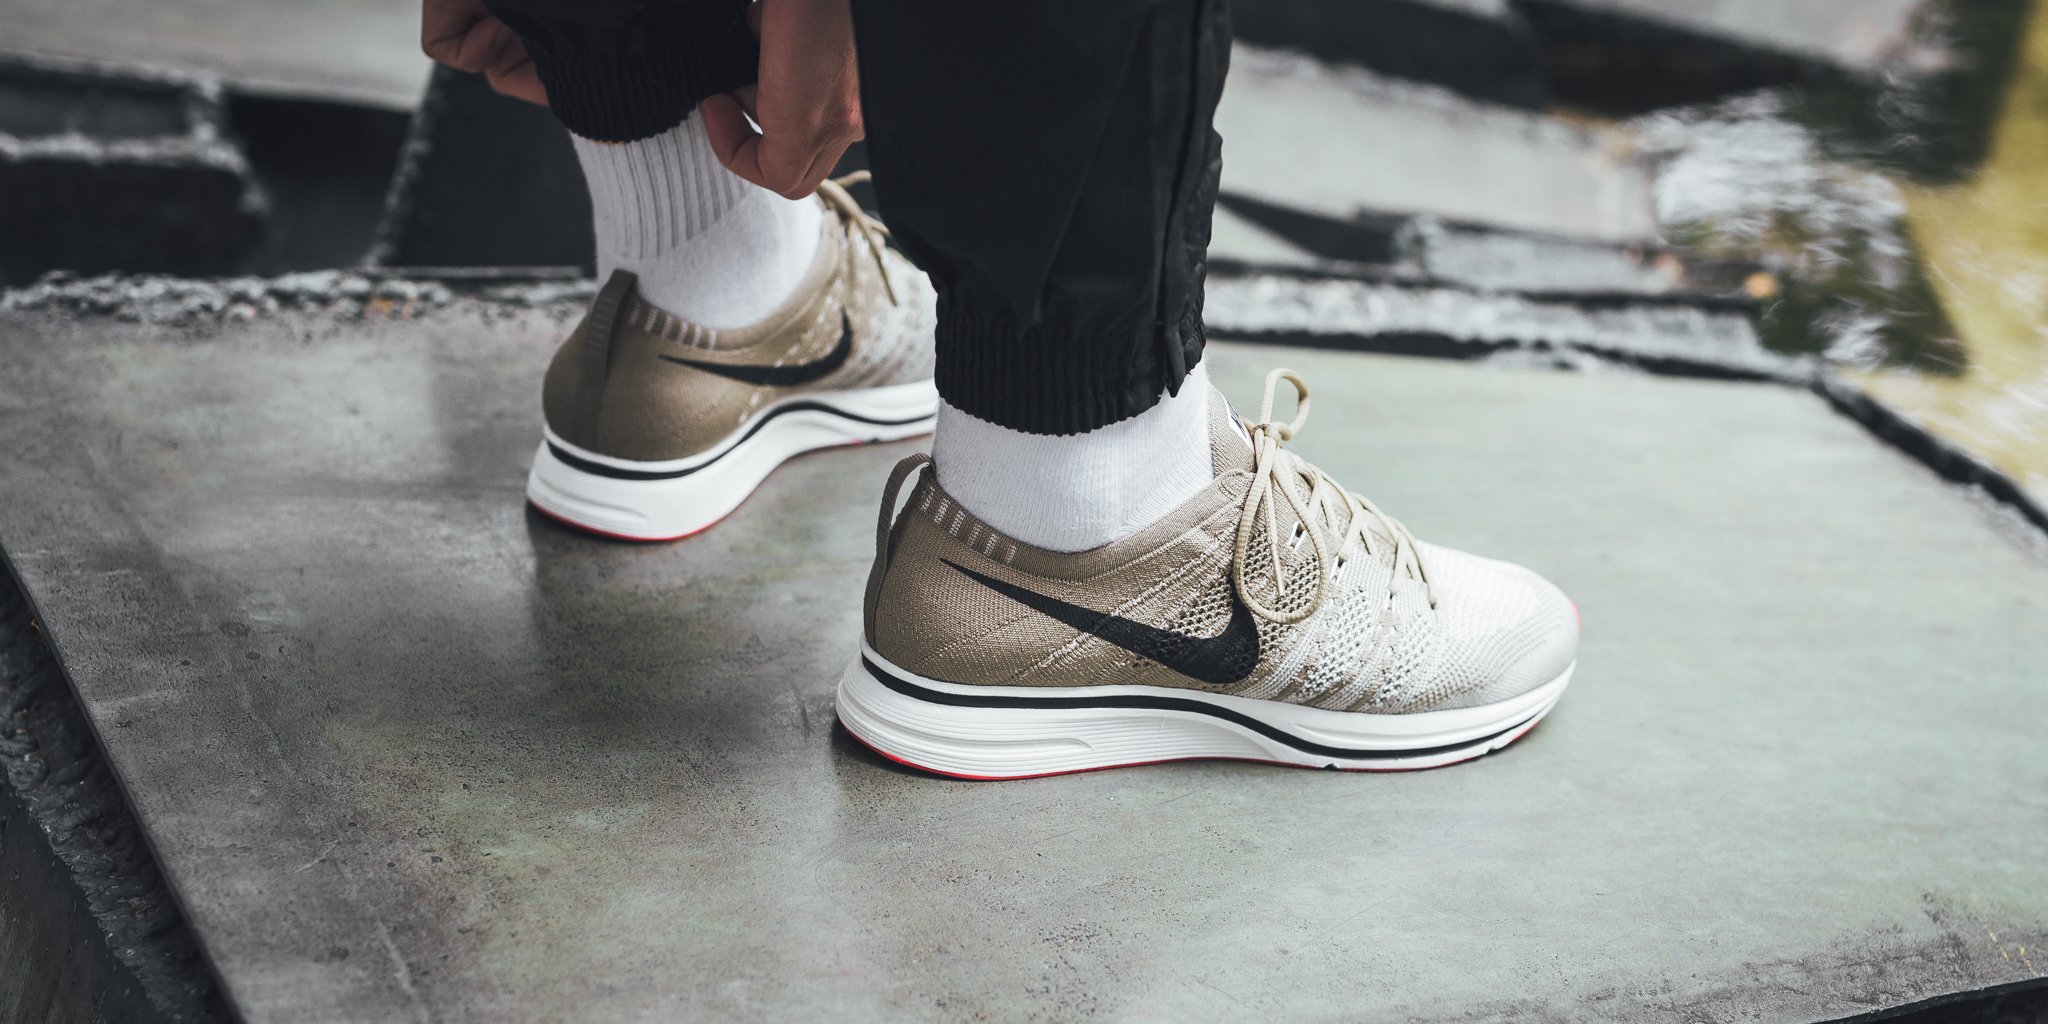 Titolo on Twitter: "Nike Flyknit Trainer - Neutral Olive/Velvet Brown-Sail  on #sale right now ❗️ take a l👀k over here ➡️➡️➡️ https://t.co/7DSxuYZh6U  #sale #sales #sneakers #nike #adidas #puma #reebok #asics #vans #converse #